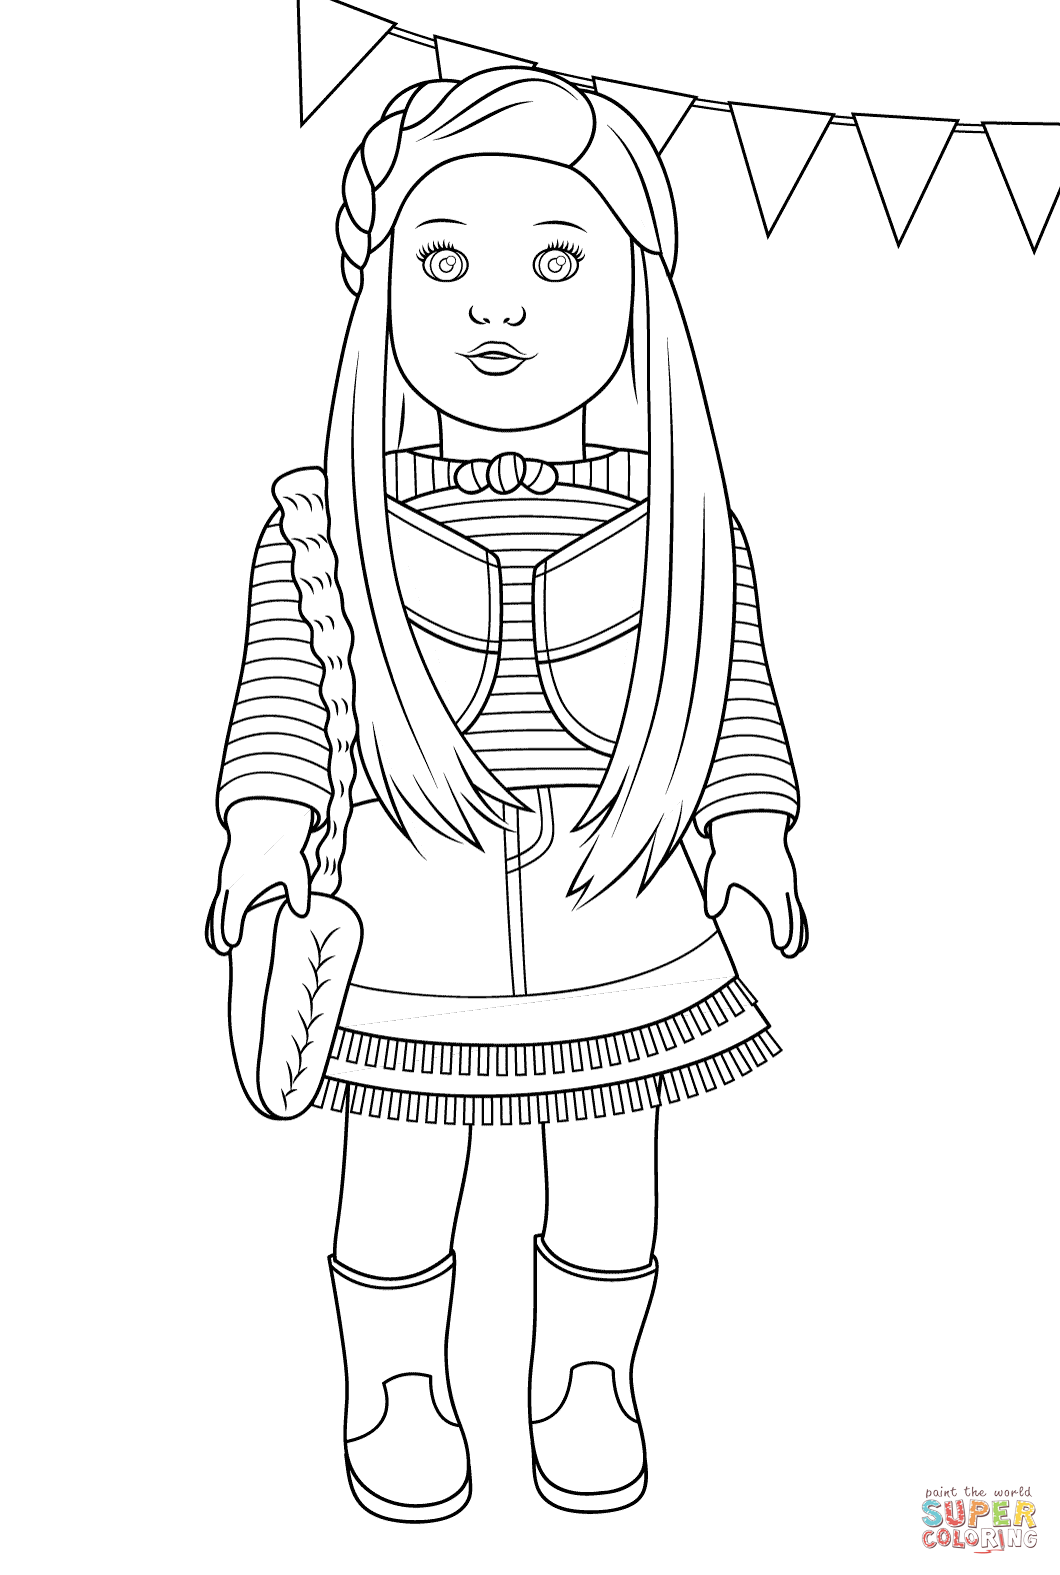 American girl doll coloring pages to download and print for free